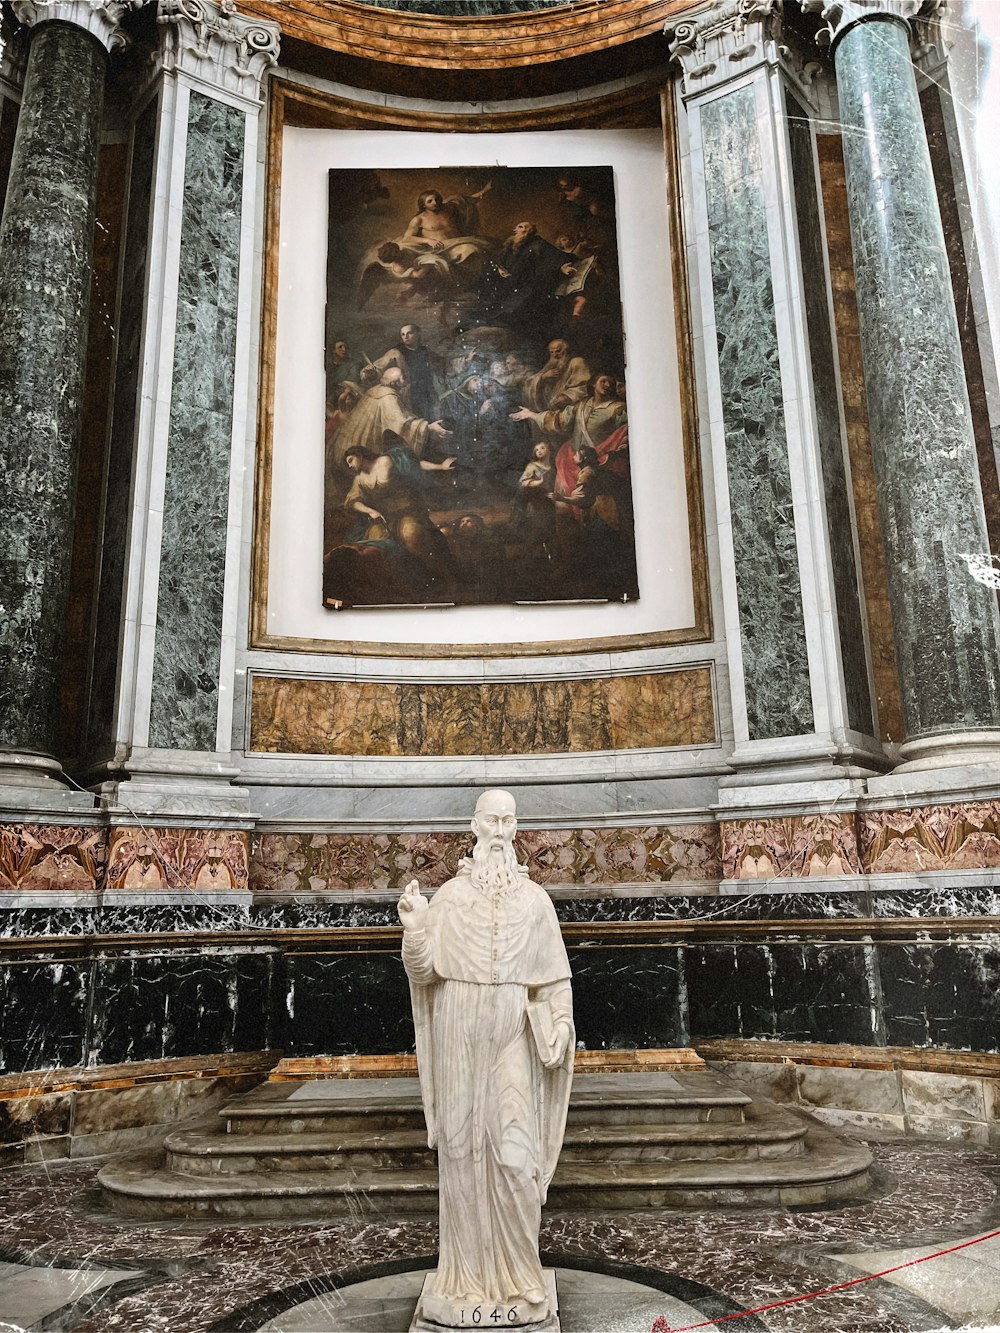 a statue of a man standing in front of a painting